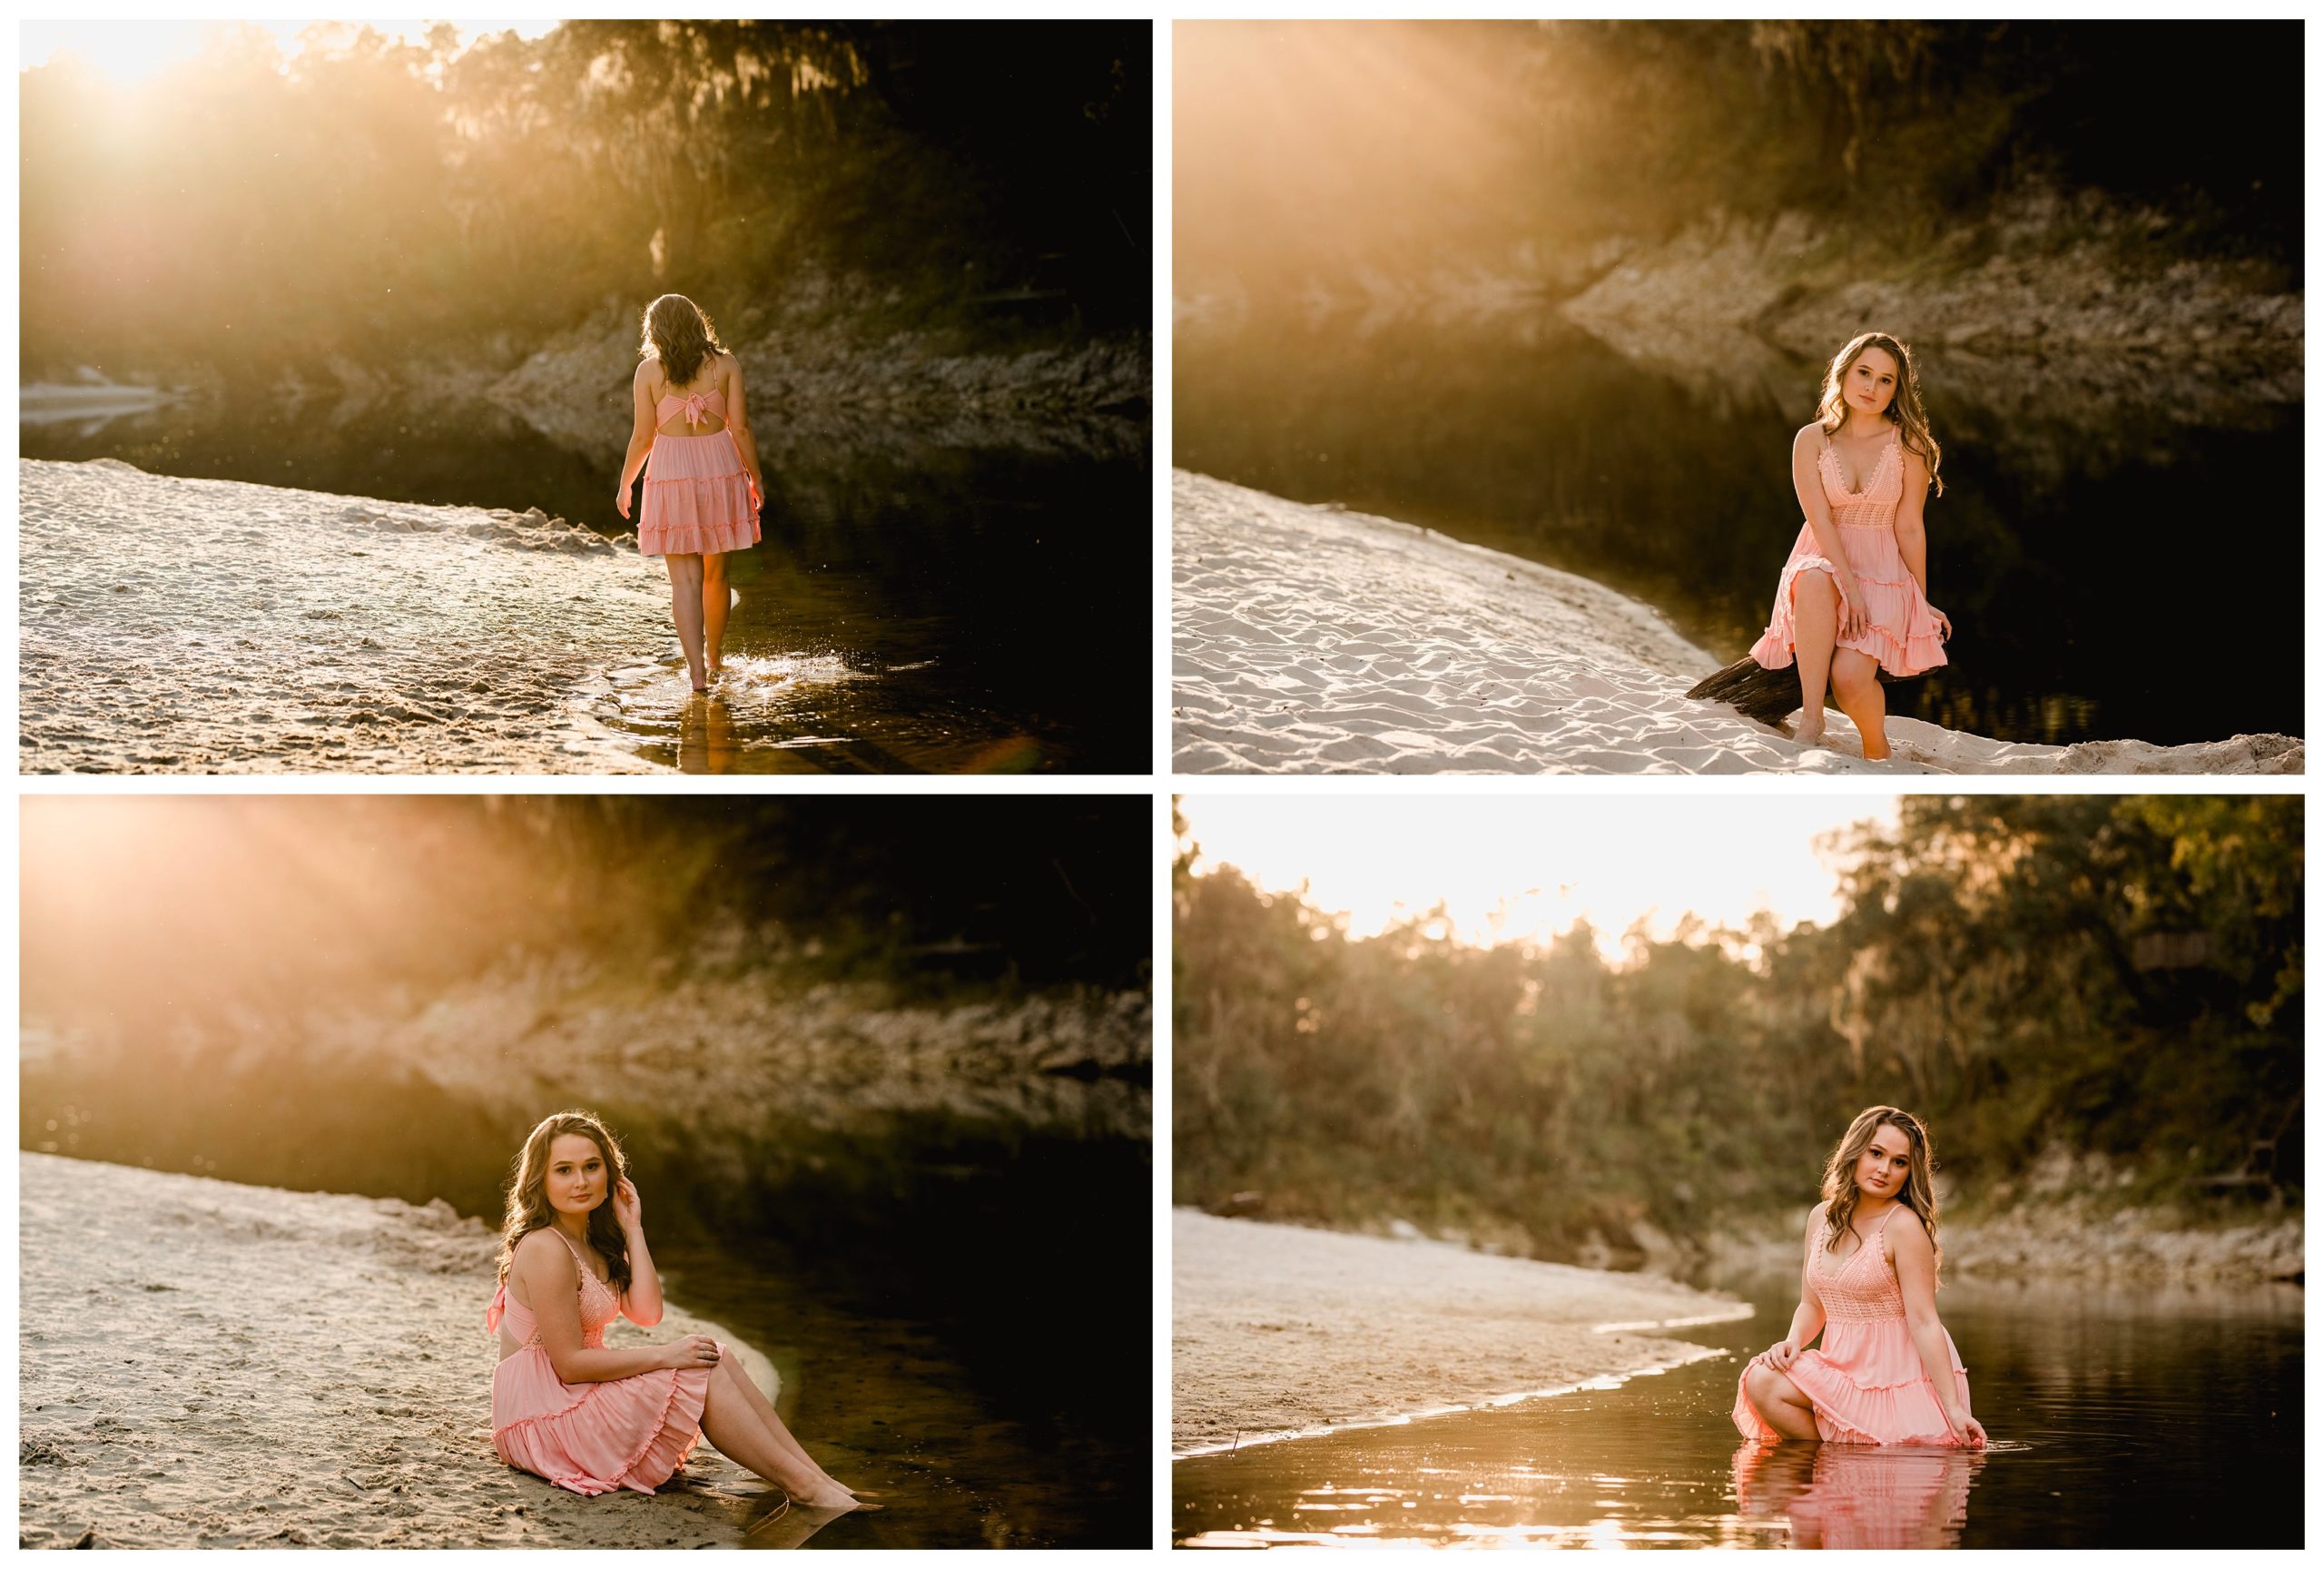 Sunset senior photography along the river during the golden hour.